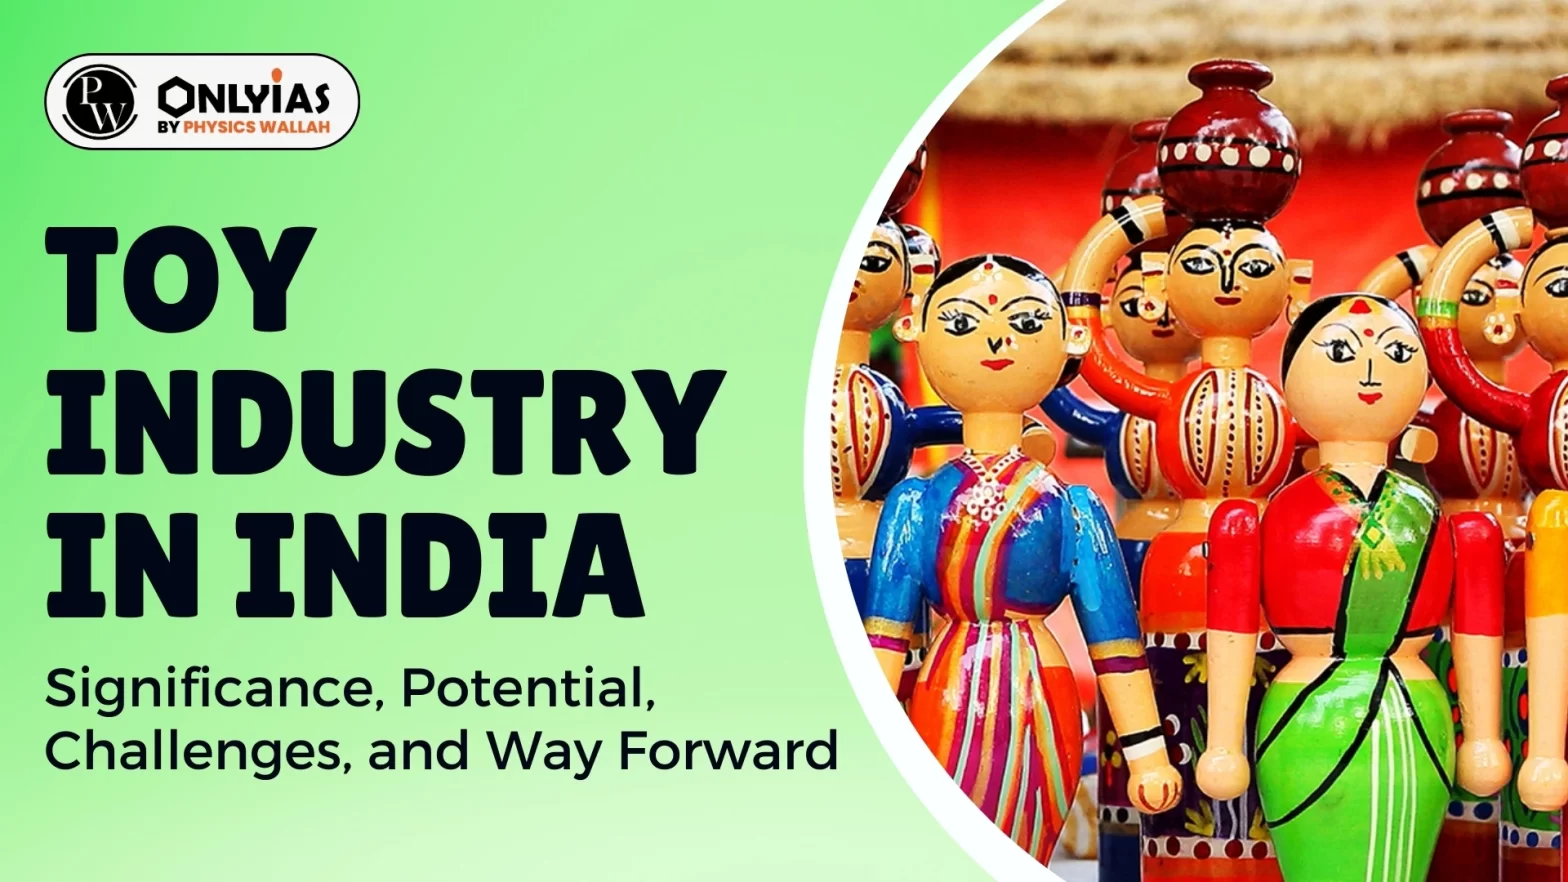 Toy Industry in India: Significance, Potential, Challenges, and Way Forward